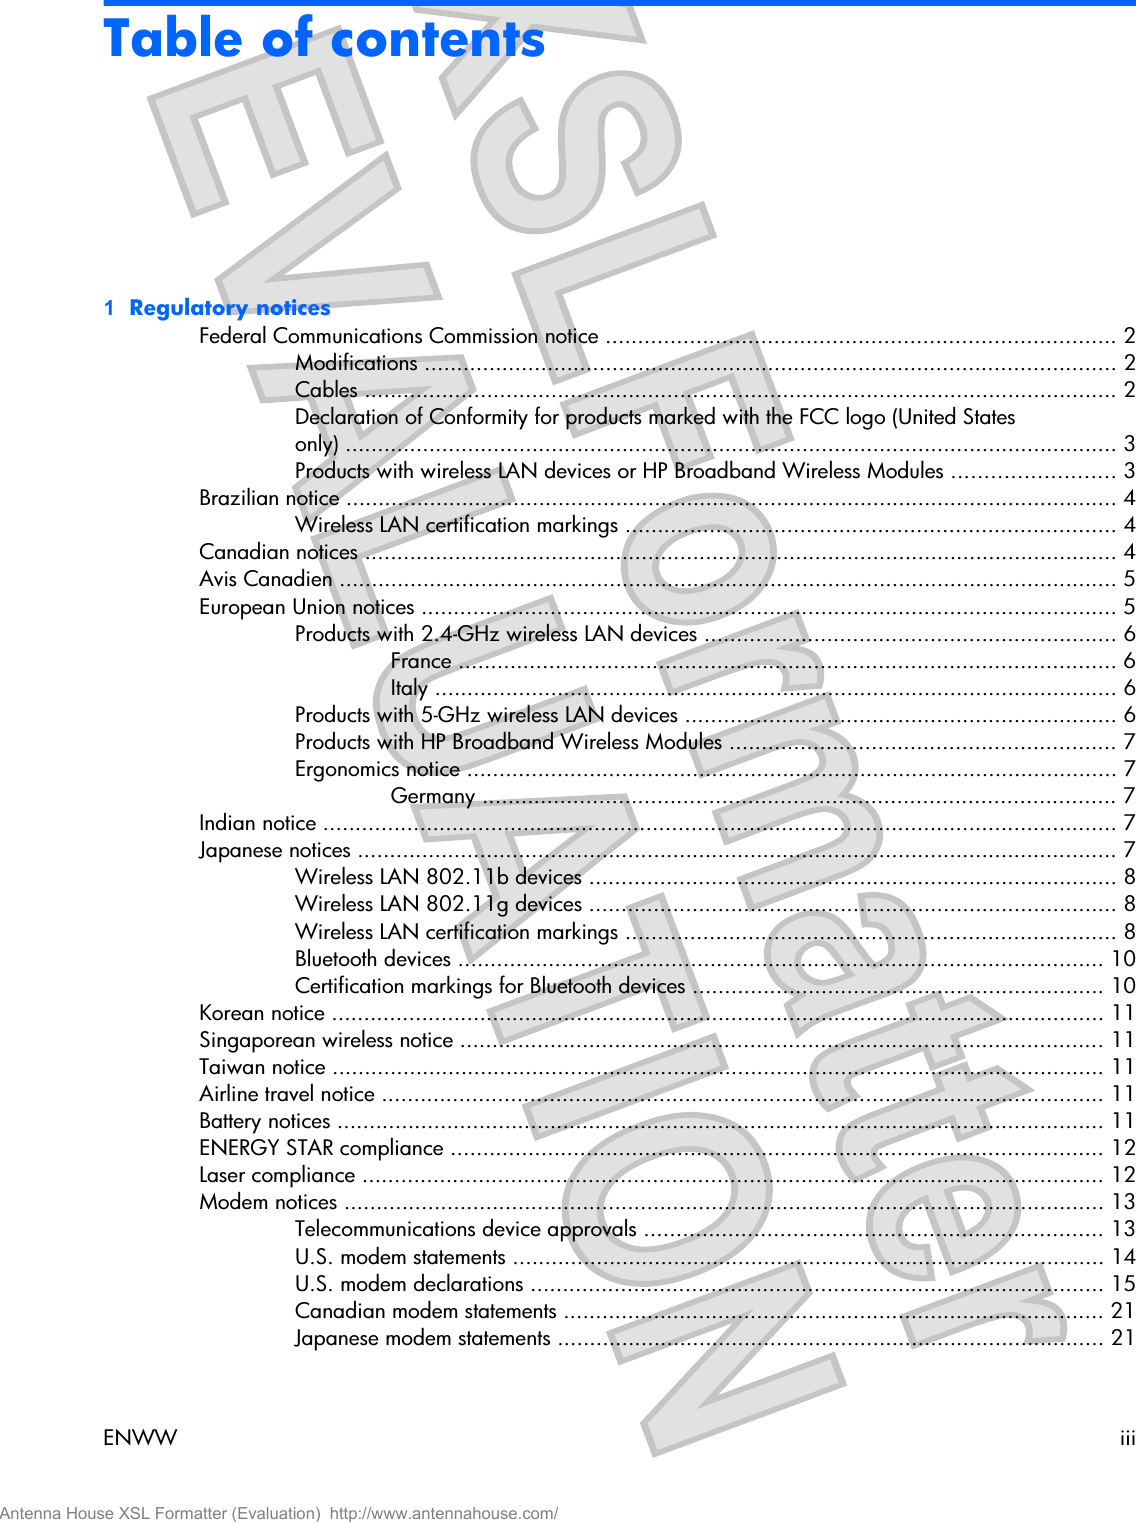 Table of contents1  Regulatory noticesFederal Communications Commission notice ............................................................................... 2Modifications ........................................................................................................... 2Cables ..................................................................................................................... 2Declaration of Conformity for products marked with the FCC logo (United Statesonly) ........................................................................................................................ 3Products with wireless LAN devices or HP Broadband Wireless Modules ......................... 3Brazilian notice ........................................................................................................................ 4Wireless LAN certification markings ............................................................................ 4Canadian notices ..................................................................................................................... 4Avis Canadien ......................................................................................................................... 5European Union notices ............................................................................................................ 5Products with 2.4-GHz wireless LAN devices ................................................................ 6France ...................................................................................................... 6Italy .......................................................................................................... 6Products with 5-GHz wireless LAN devices ................................................................... 6Products with HP Broadband Wireless Modules ............................................................ 7Ergonomics notice ..................................................................................................... 7Germany .................................................................................................. 7Indian notice ........................................................................................................................... 7Japanese notices ...................................................................................................................... 7Wireless LAN 802.11b devices .................................................................................. 8Wireless LAN 802.11g devices .................................................................................. 8Wireless LAN certification markings ............................................................................ 8Bluetooth devices .................................................................................................... 10Certification markings for Bluetooth devices ................................................................ 10Korean notice ........................................................................................................................ 11Singaporean wireless notice .................................................................................................... 11Taiwan notice ........................................................................................................................ 11Airline travel notice ................................................................................................................ 11Battery notices ....................................................................................................................... 11ENERGY STAR compliance ..................................................................................................... 12Laser compliance ................................................................................................................... 12Modem notices ...................................................................................................................... 13Telecommunications device approvals ....................................................................... 13U.S. modem statements ............................................................................................ 14U.S. modem declarations ......................................................................................... 15Canadian modem statements .................................................................................... 21Japanese modem statements ..................................................................................... 21ENWW iiiAntenna House XSL Formatter (Evaluation)  http://www.antennahouse.com/